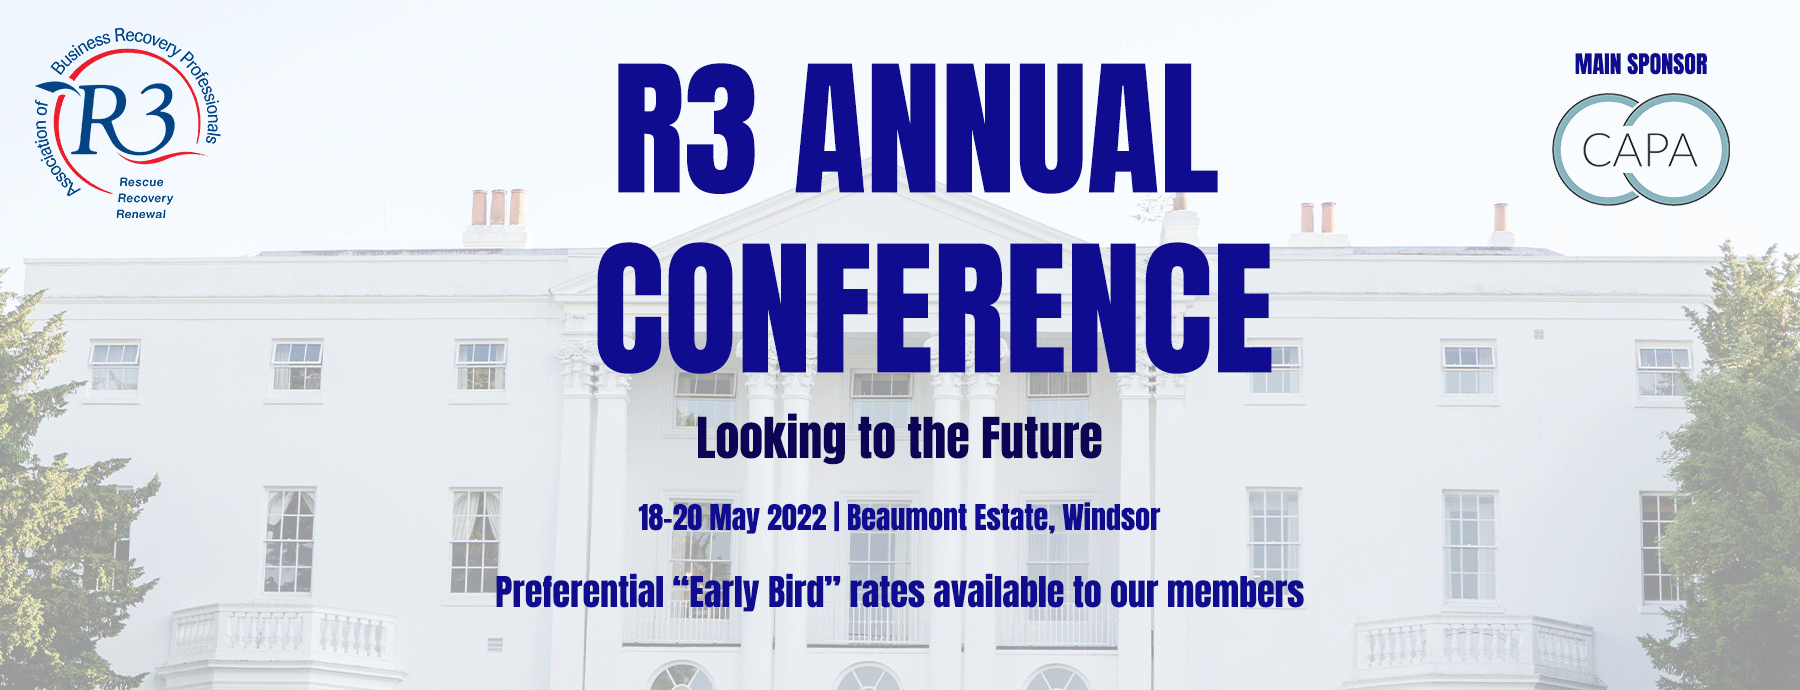 Keynote speakers confirmed for R3 2022 Annual Conference 